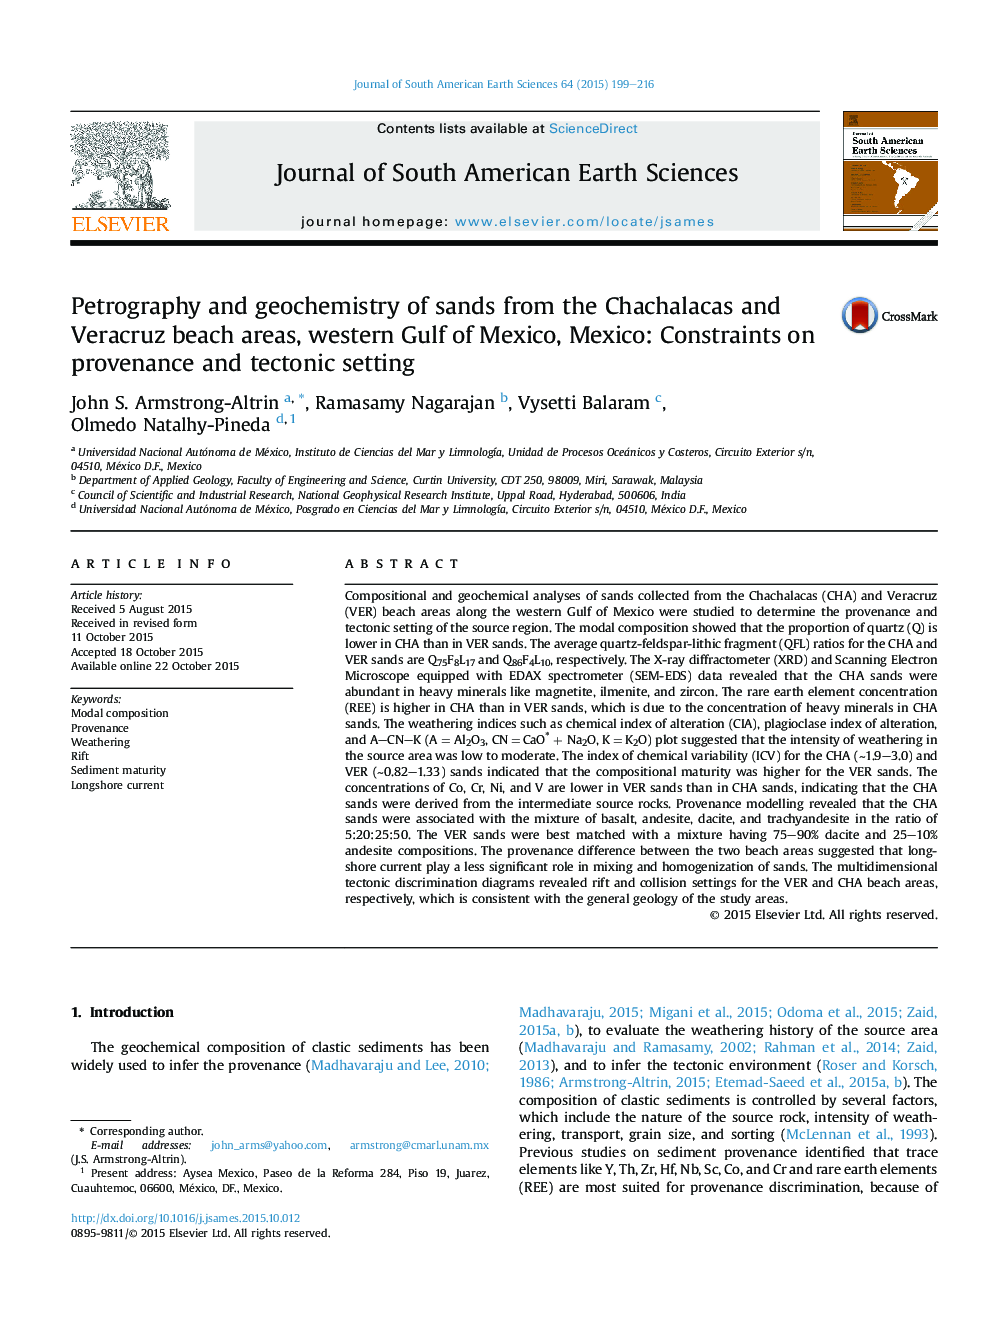 Petrography and geochemistry of sands from the Chachalacas and Veracruz beach areas, western Gulf of Mexico, Mexico: Constraints on provenance and tectonic setting